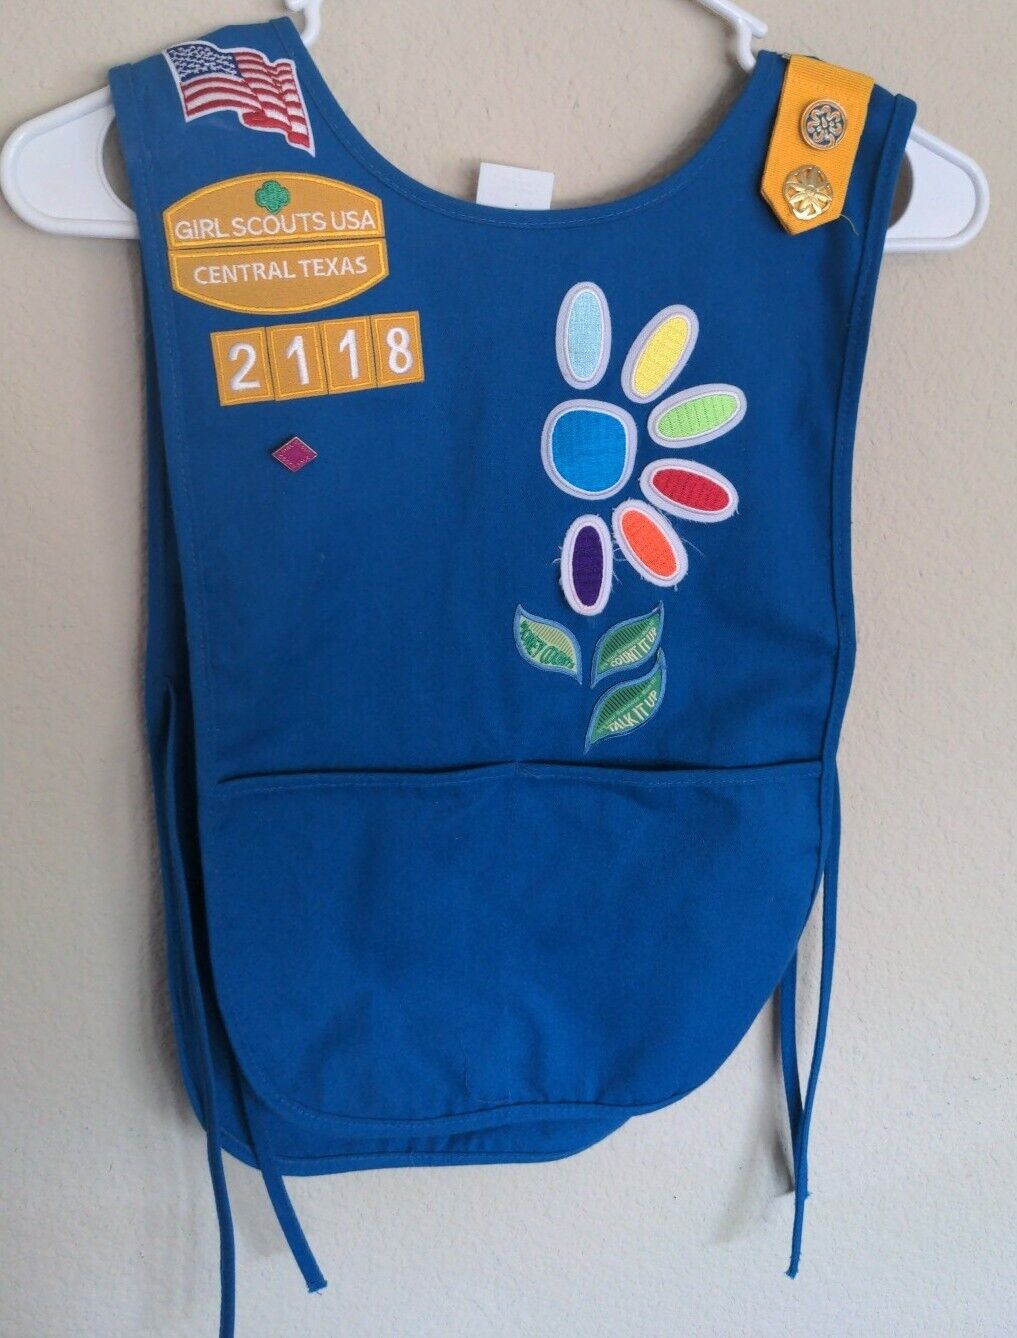 Girl Scouts Daisy USA Texas Blue Apron Tunic Uniform Patches Pins Badge 